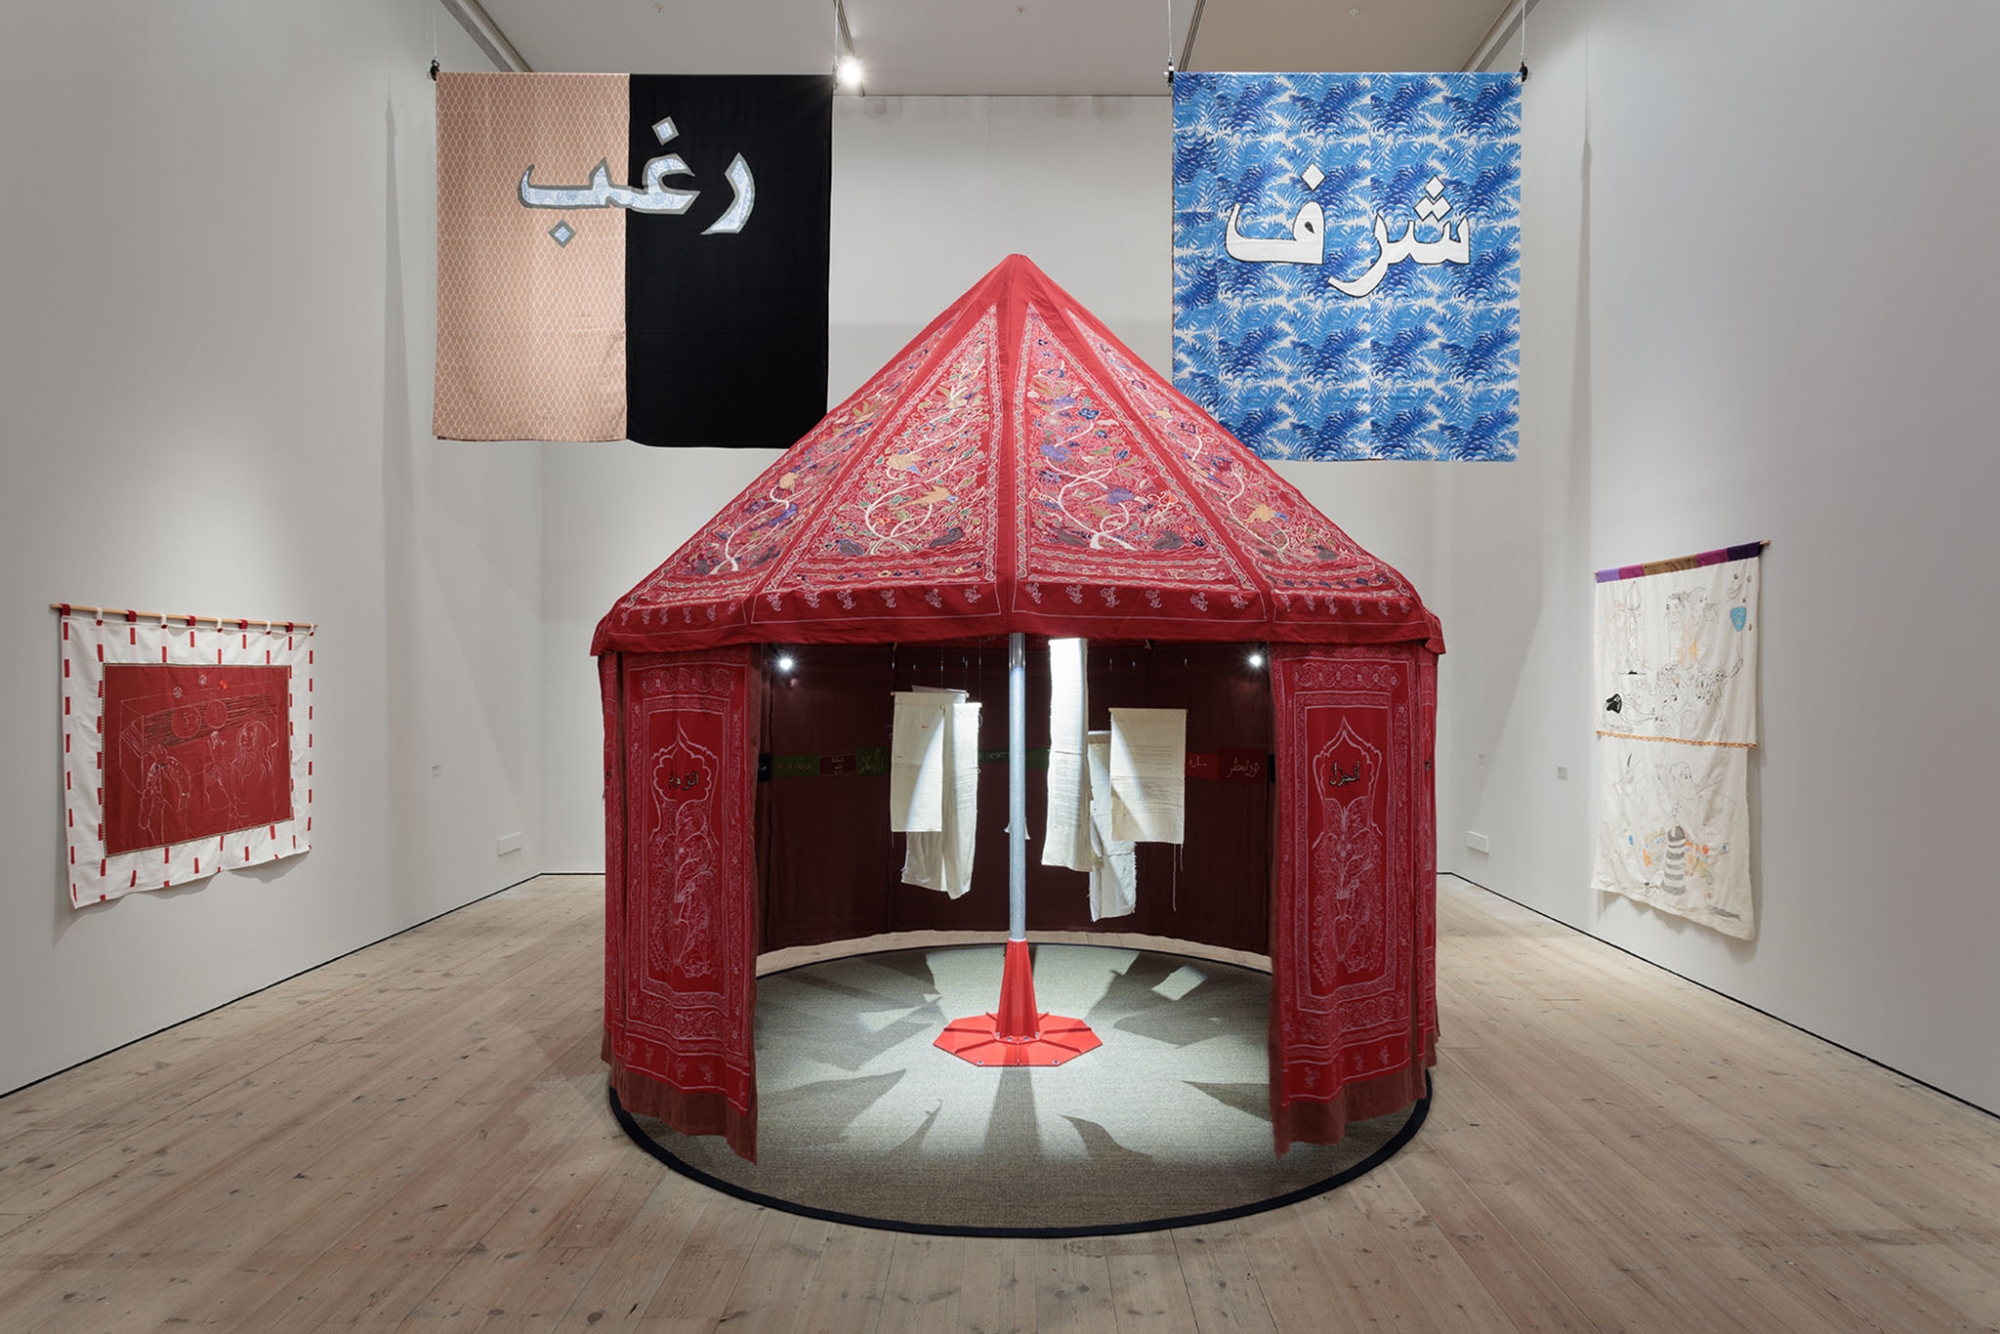 A day is as long as a year, Installation view, BALTIC Centre for Contemporary Art, Gateshead. Photo: Rob Harris ©2022 BALTIC